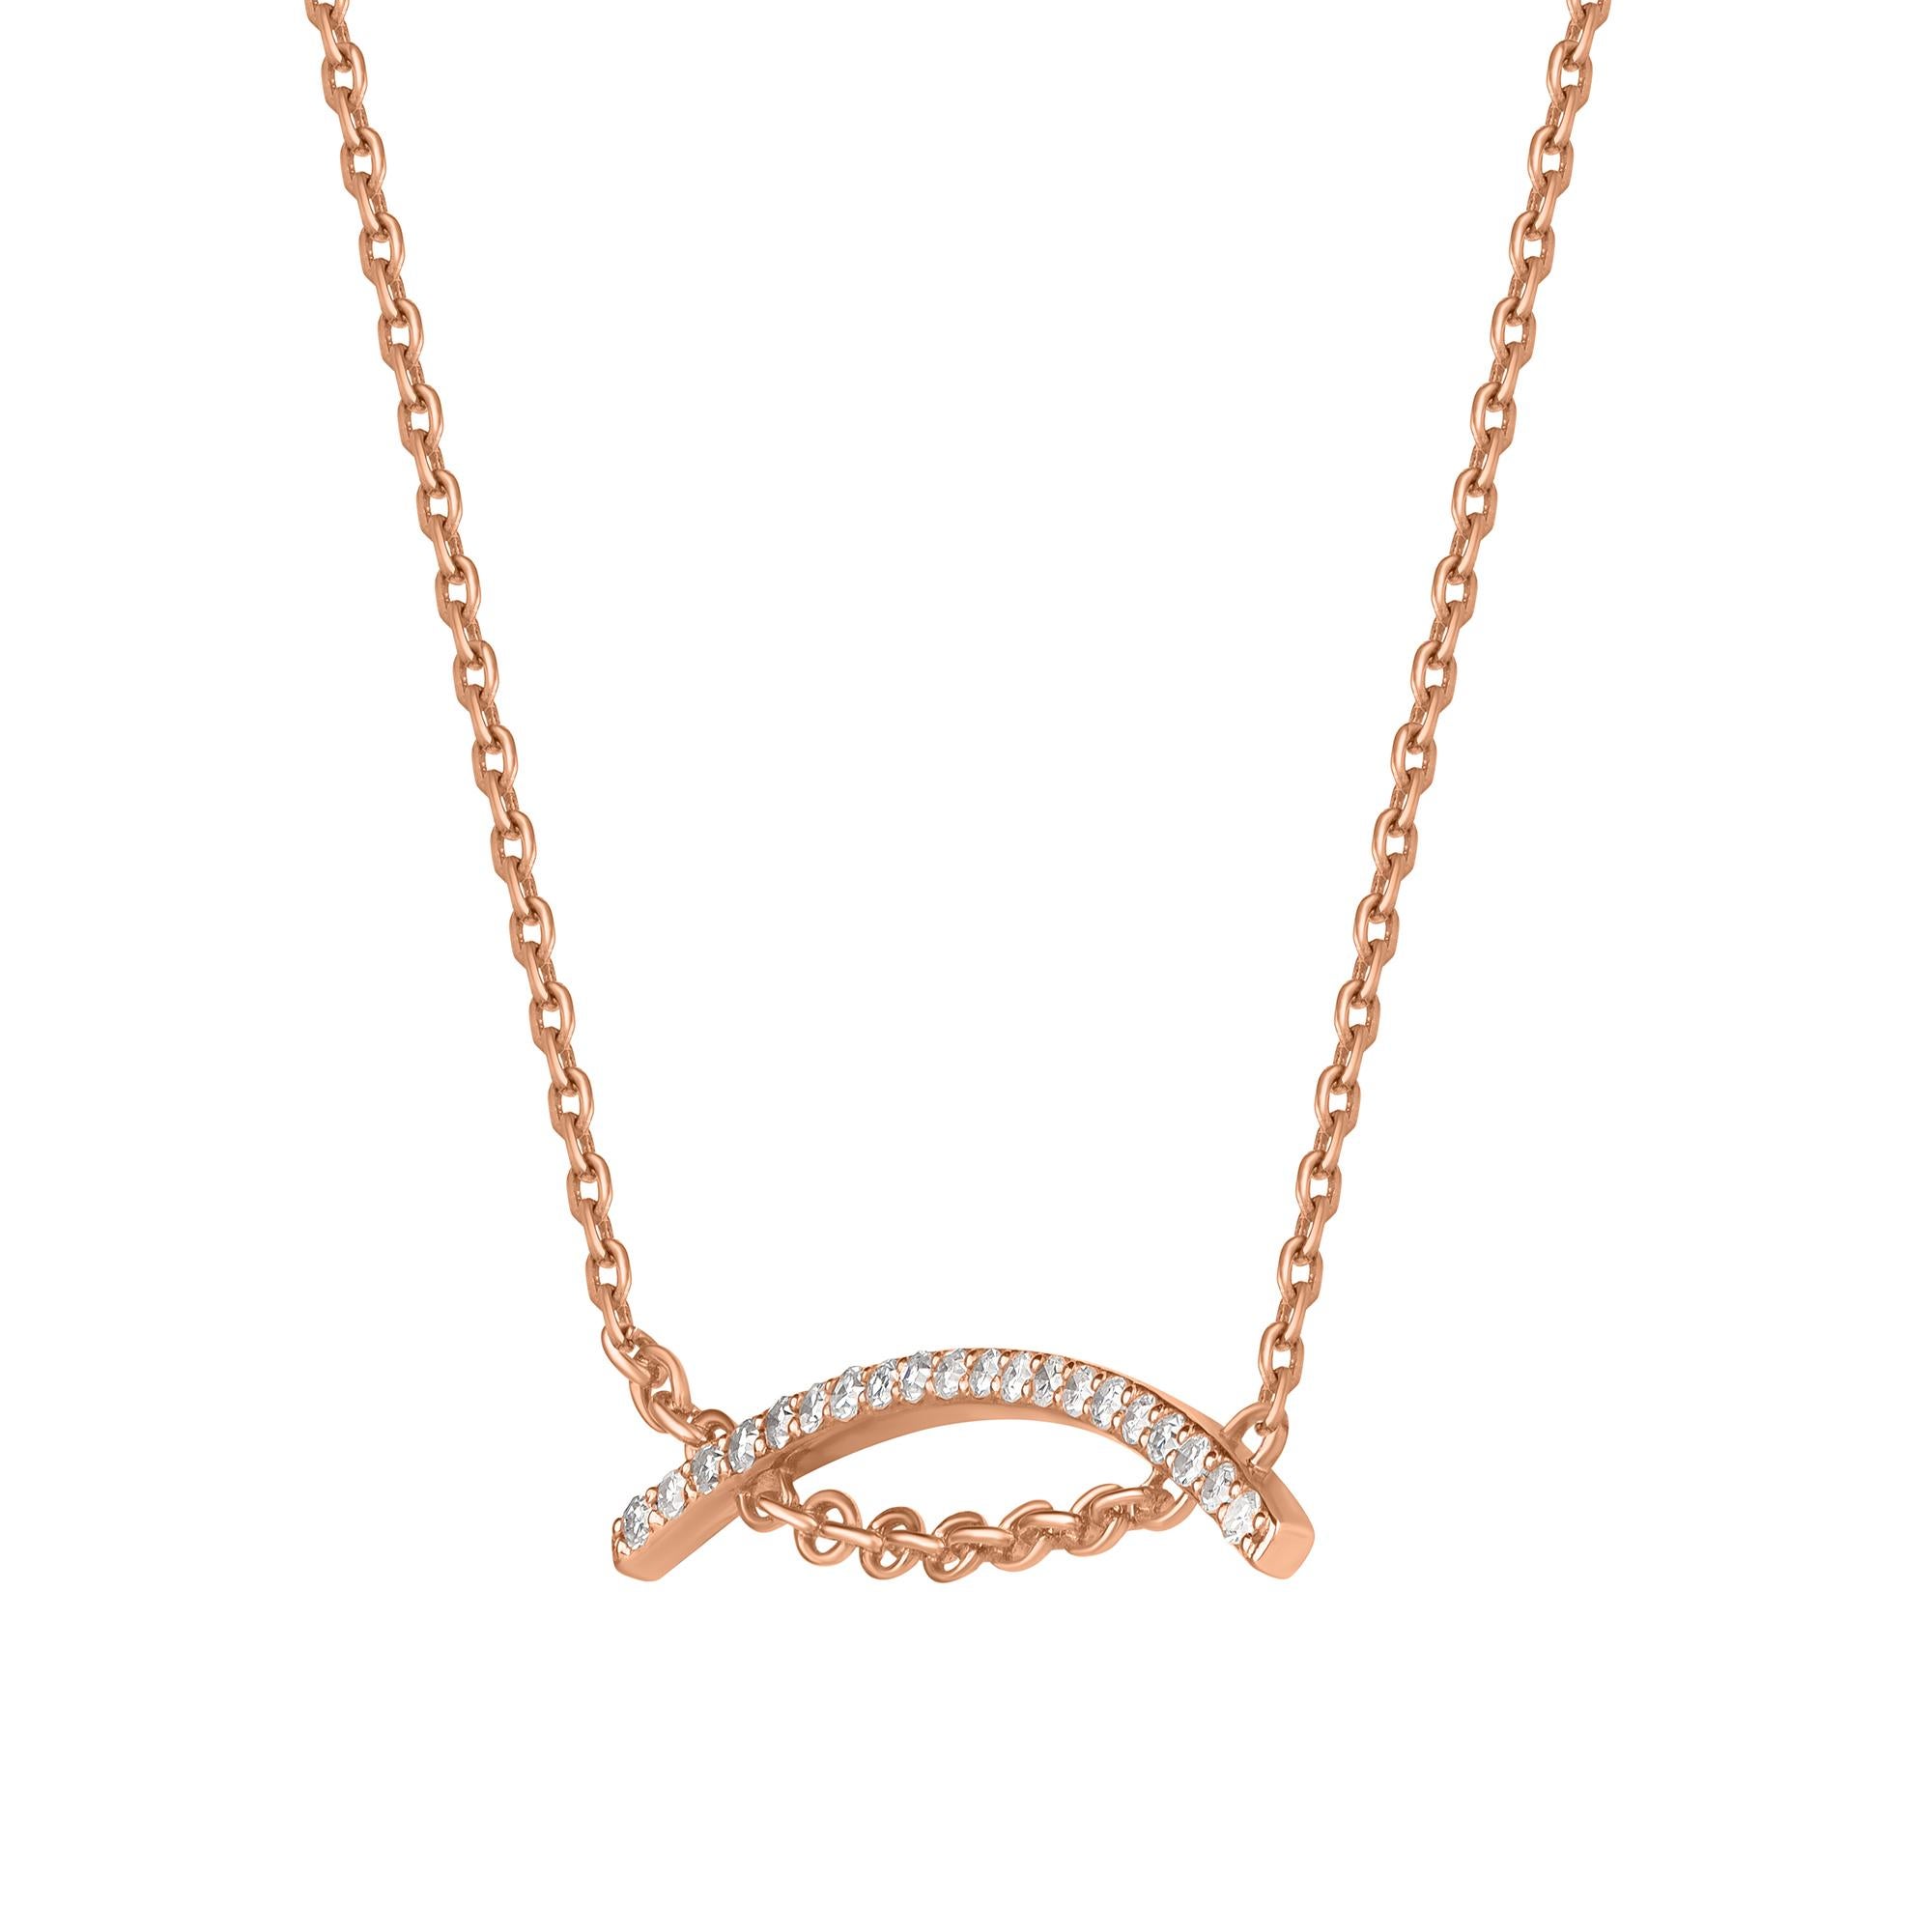 Bring charm to your look with this diamond pendant Necklace. Made by skillful craftsmen in 14KT rose gold and studded with 20 round brilliant cut white diamonds in prong setting and shine in H-I Color I2 Clarity. The total diamond weight is 0.20